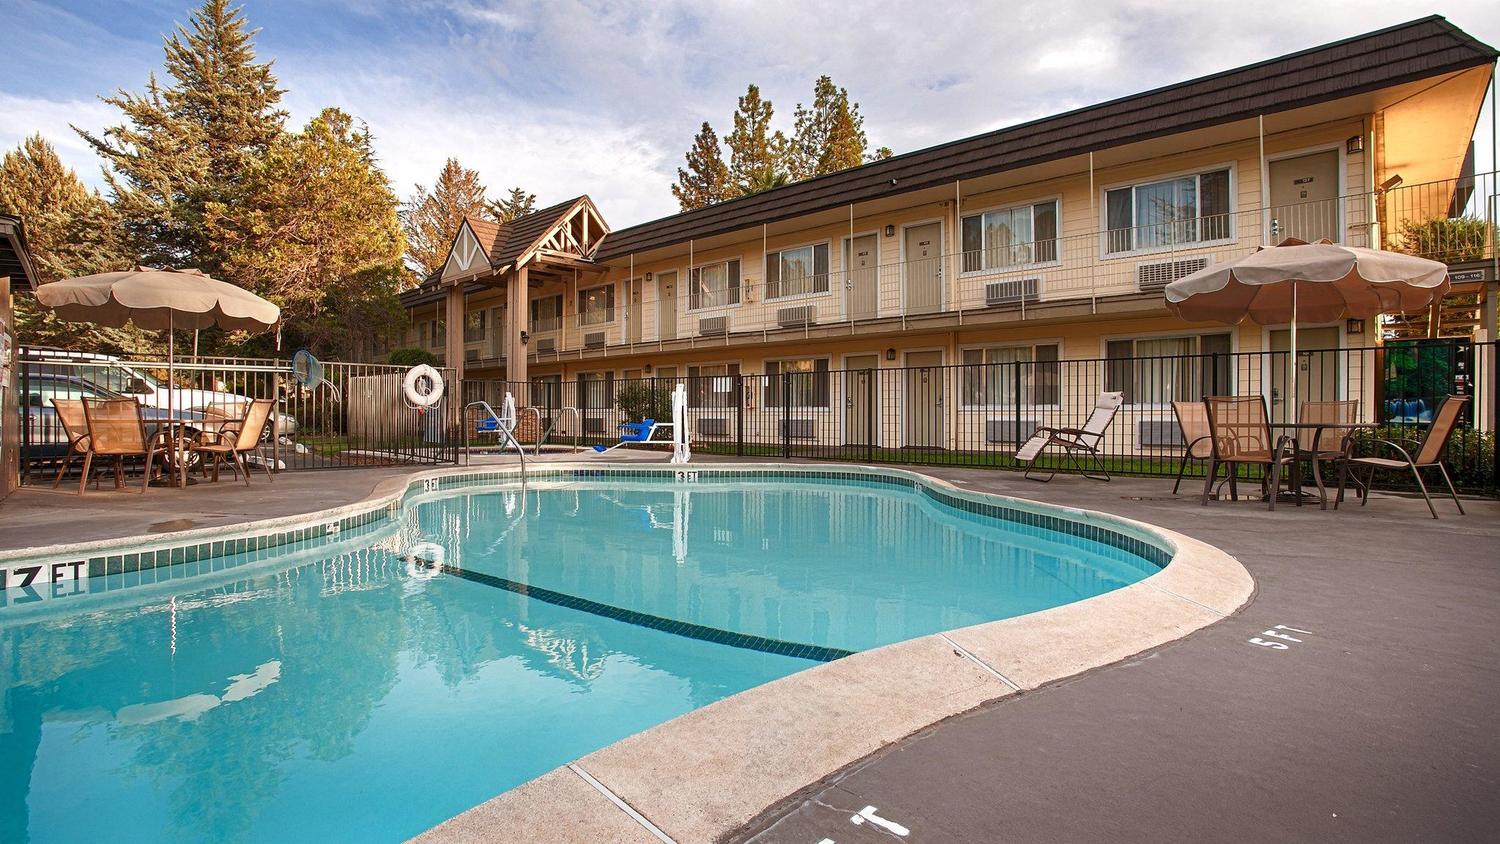 Best Western Gold Country, Grass Valley, CA Jobs ...